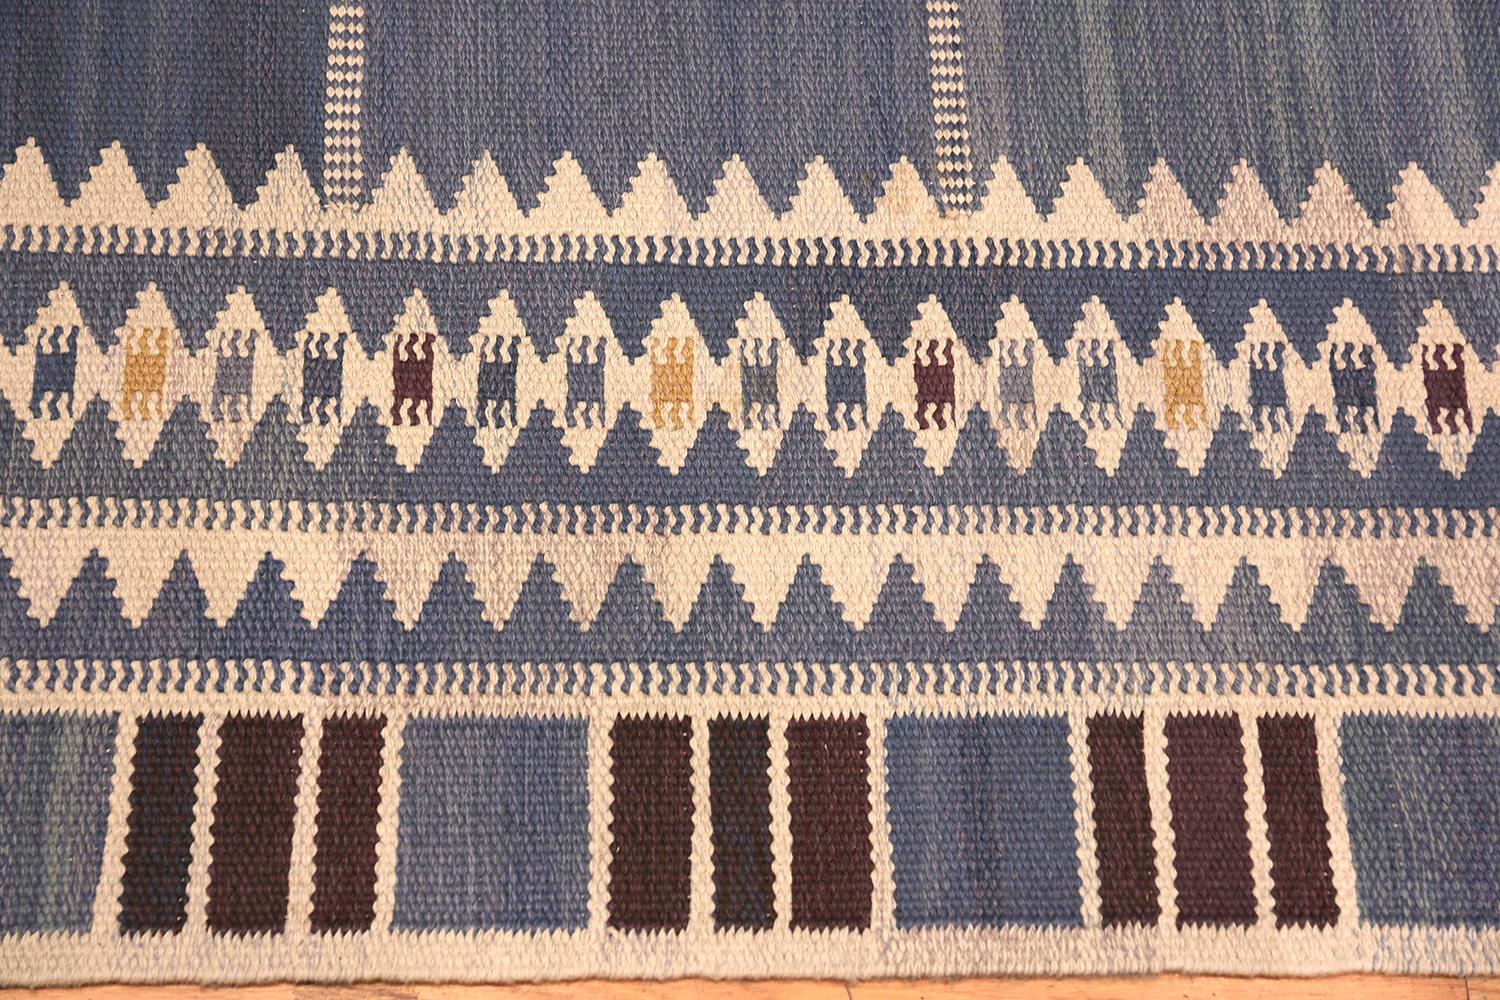 Beautiful vintage Scandinavian Salerno blue by Barbro Nilsson for Marta Maas rug, country of origin: Sweden, date: circa mid-20th century. Size: 9 ft 3 in x 14 ft (2.82 m x 4.27 m). 

Barbro Nilsson is one of the most iconic rug designers of the